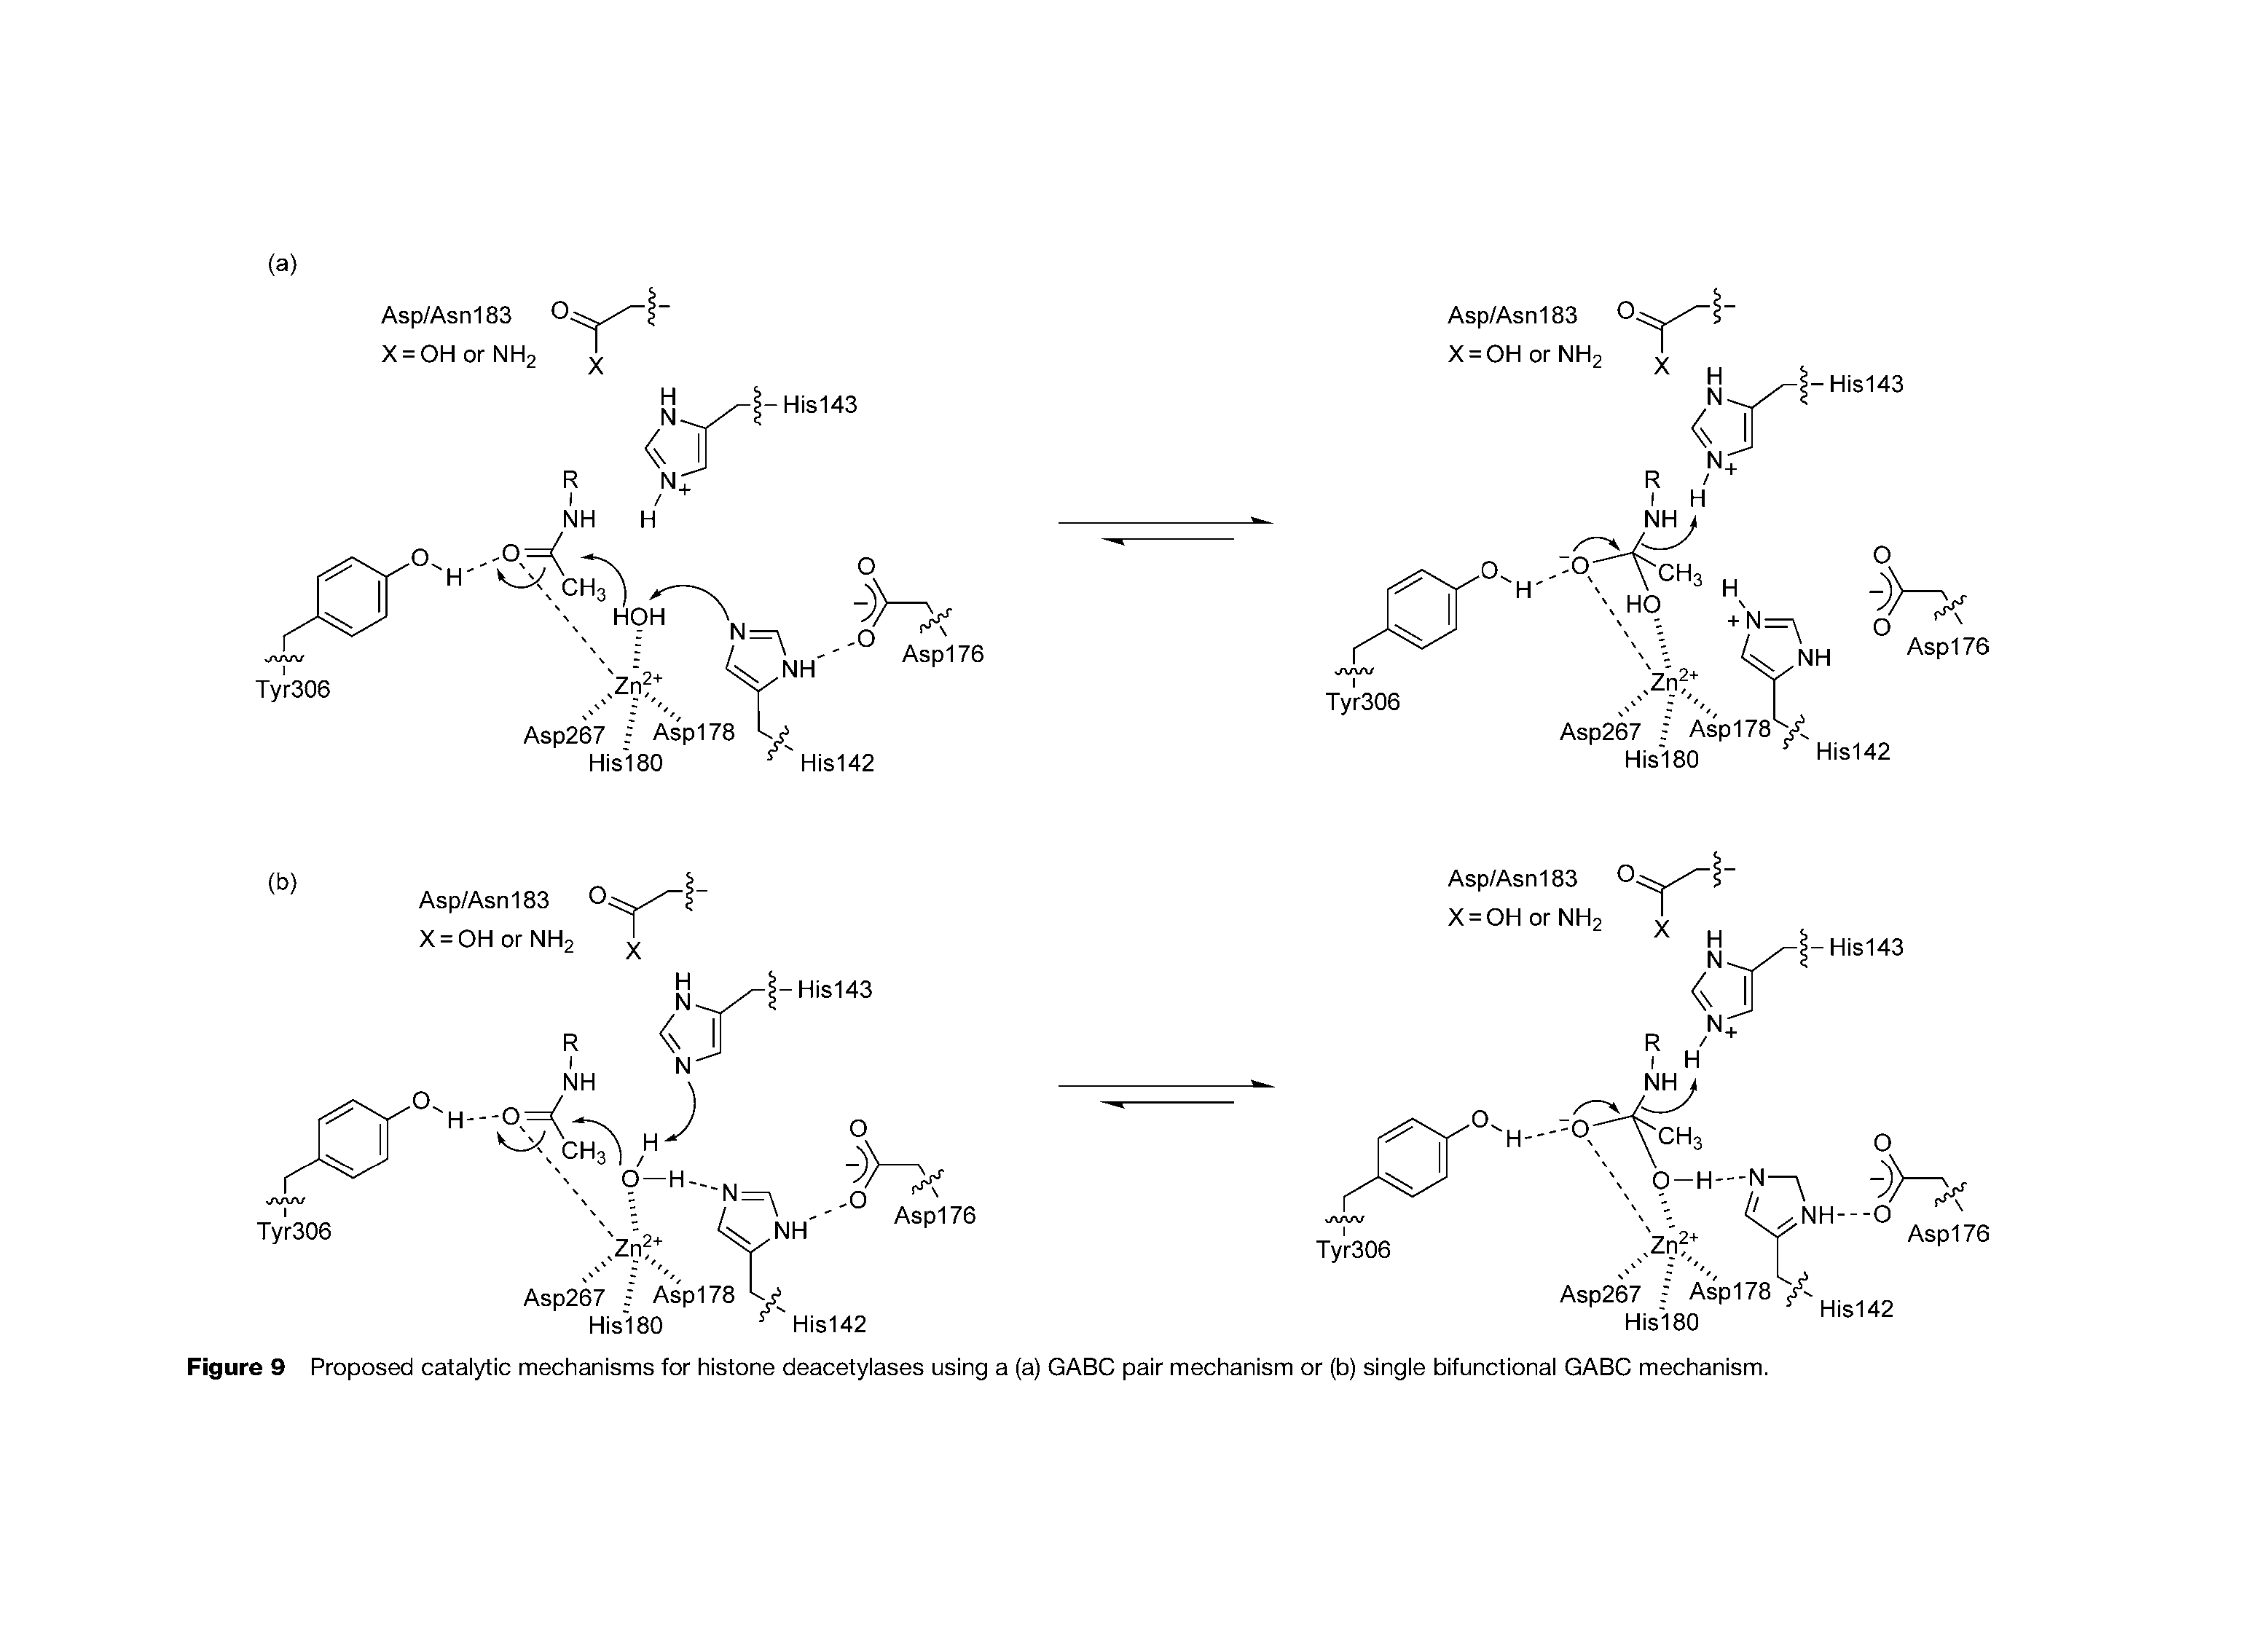 Figure 9 Proposed catalytic mechanisms for histone deacetylases using a (a) GABO pair mechanism or (b) single bifunctional GABO mechanism.